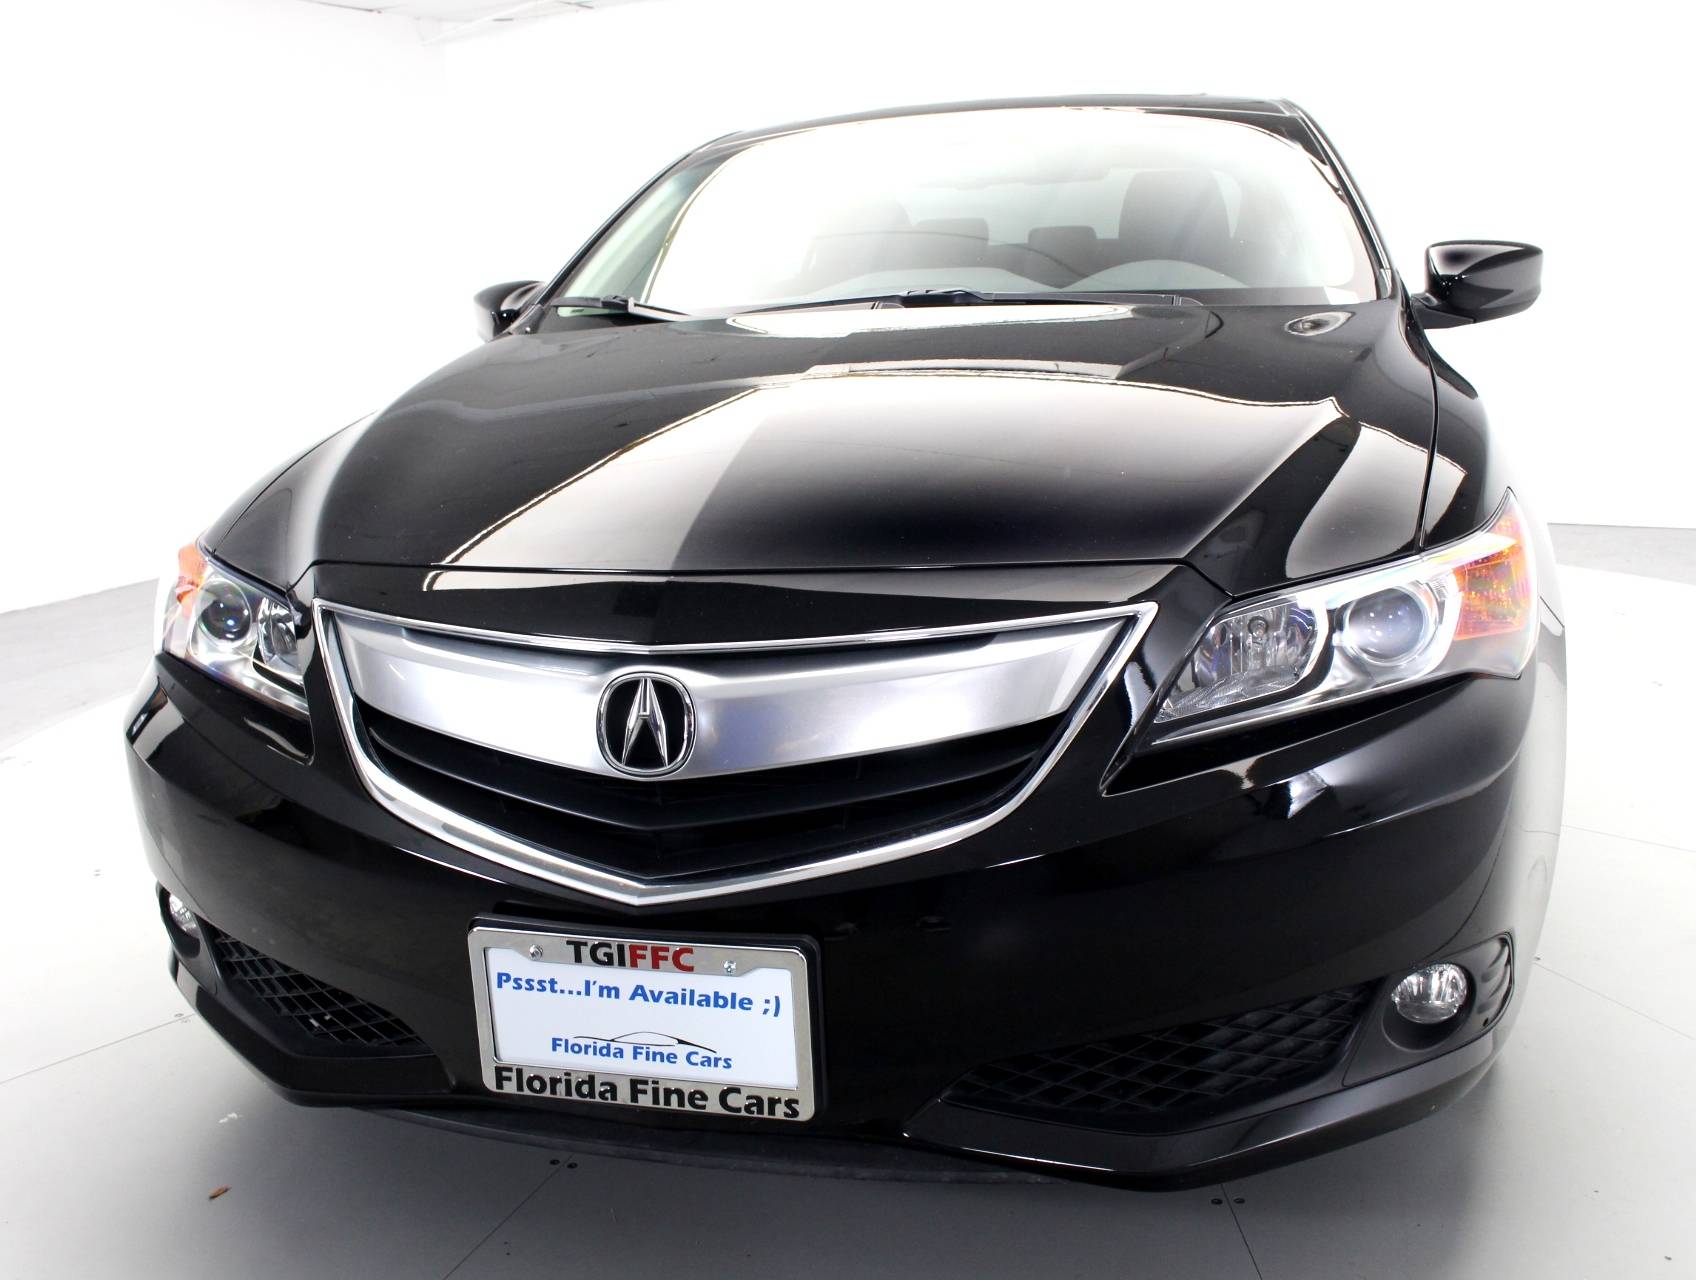 Used 2015 ACURA ILX TECHNOLOGY PACKAGE for sale in WEST PALM | 89265